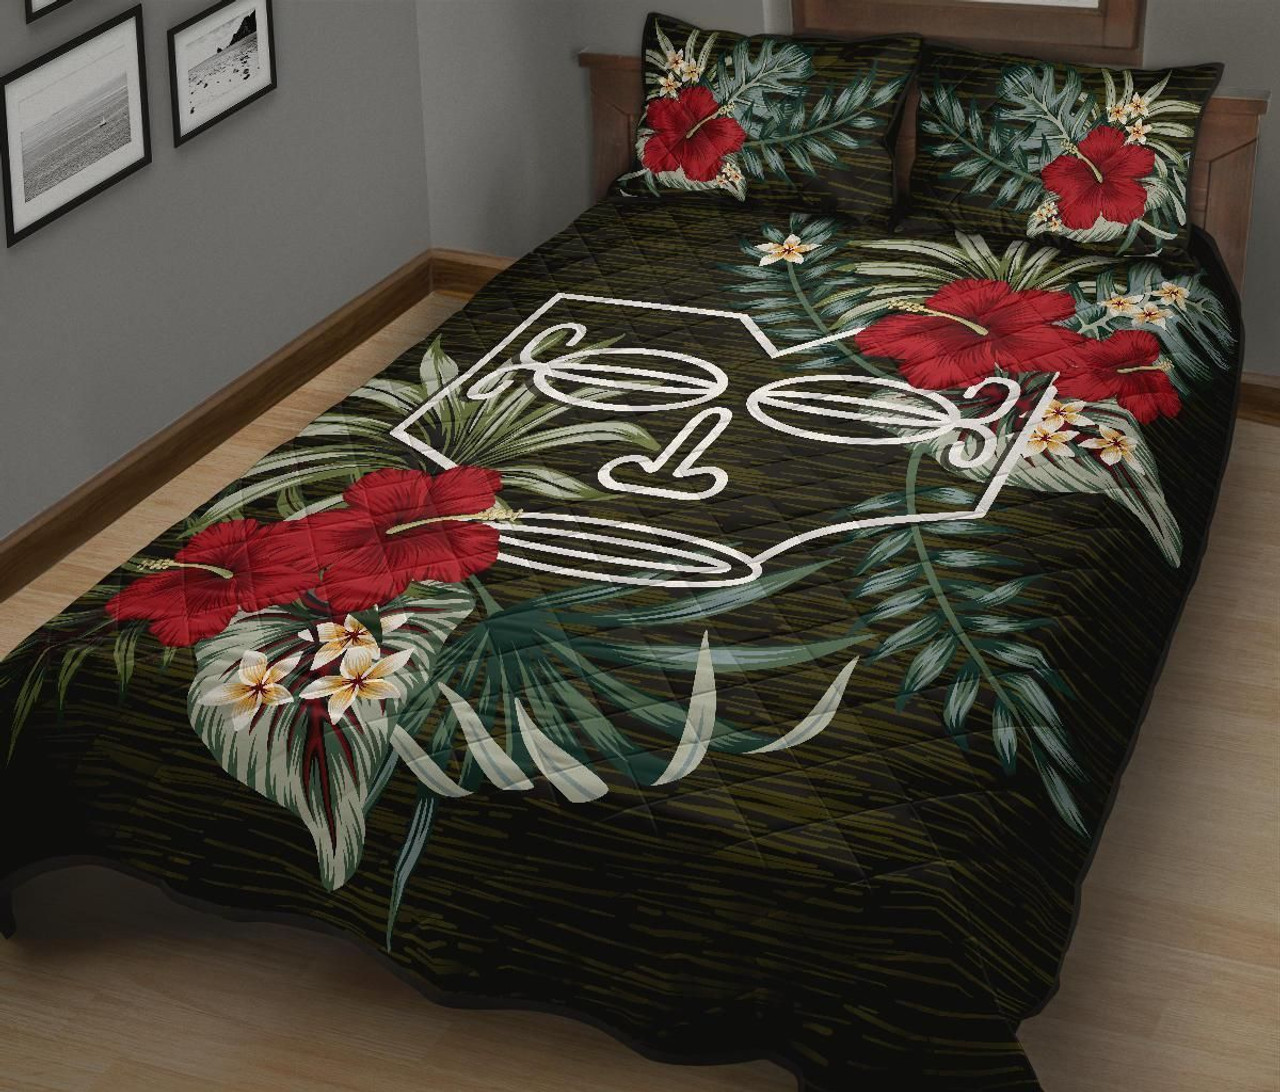 Marquesas Islands Polynesian Quilt Bed Set - Special Hibiscus 2